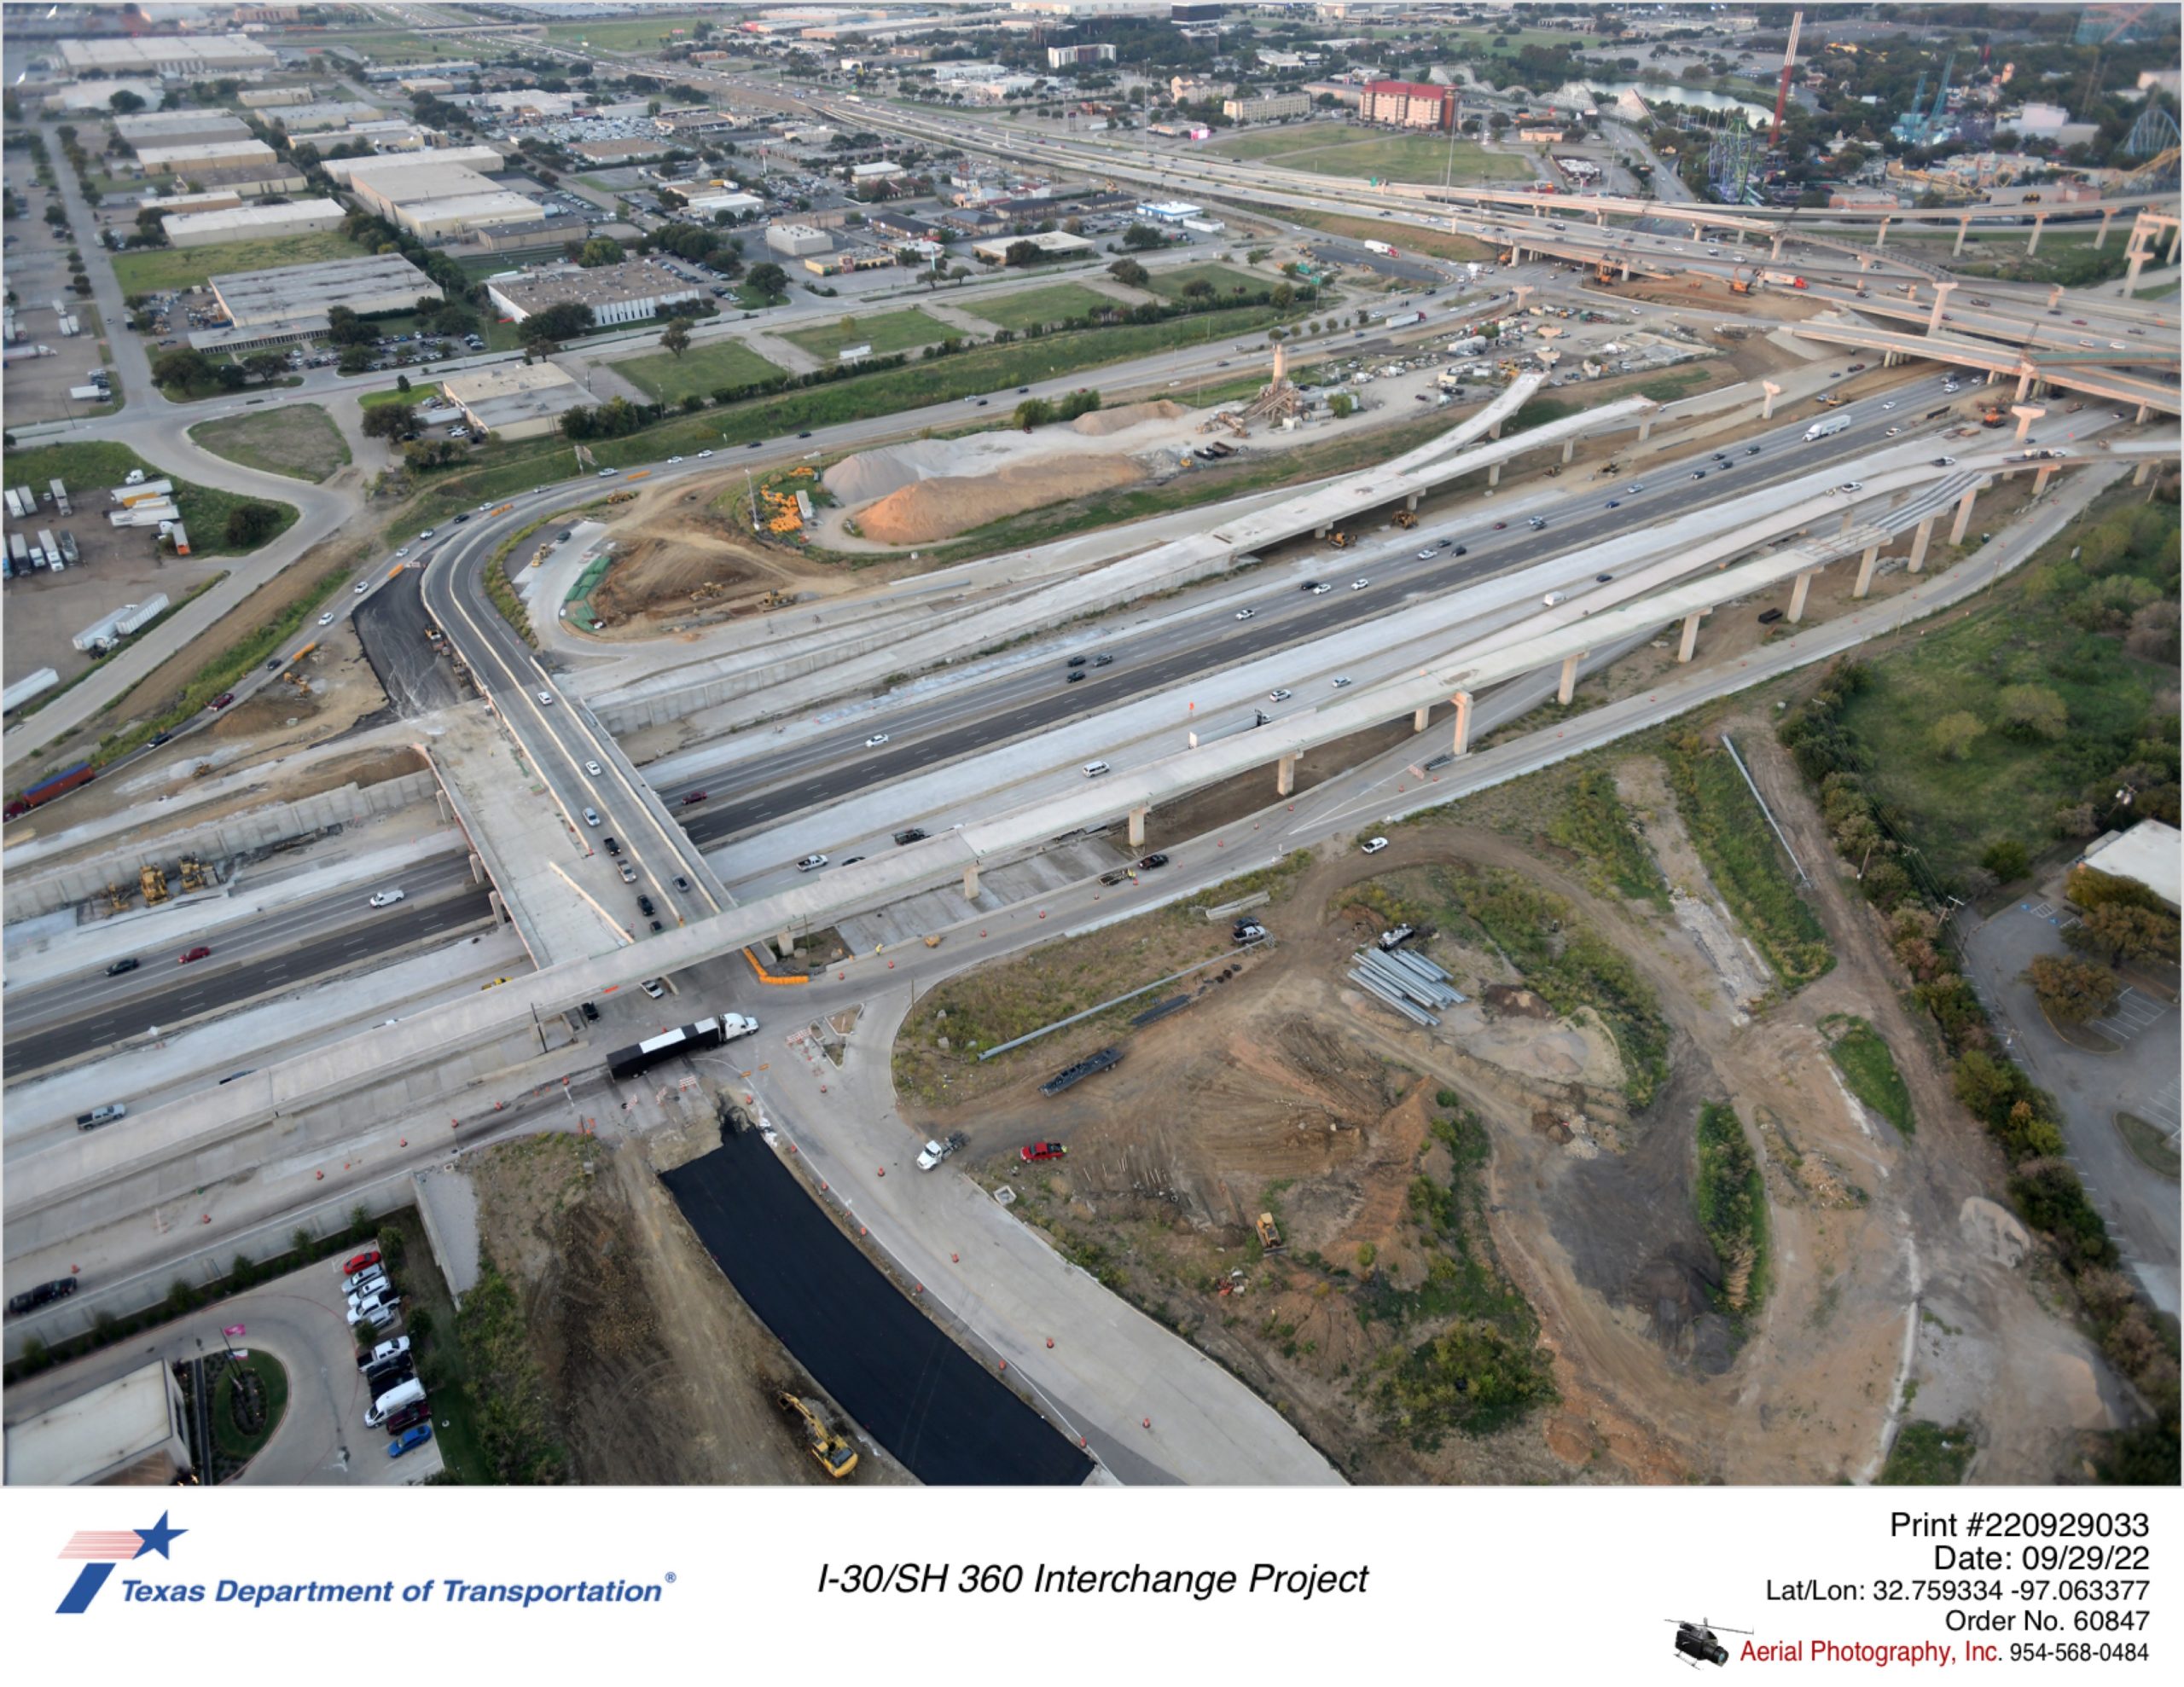 I-30/Six Flags Dr interchange looking southwest. Construction continues for northbound Six Flags Dr across I-30.